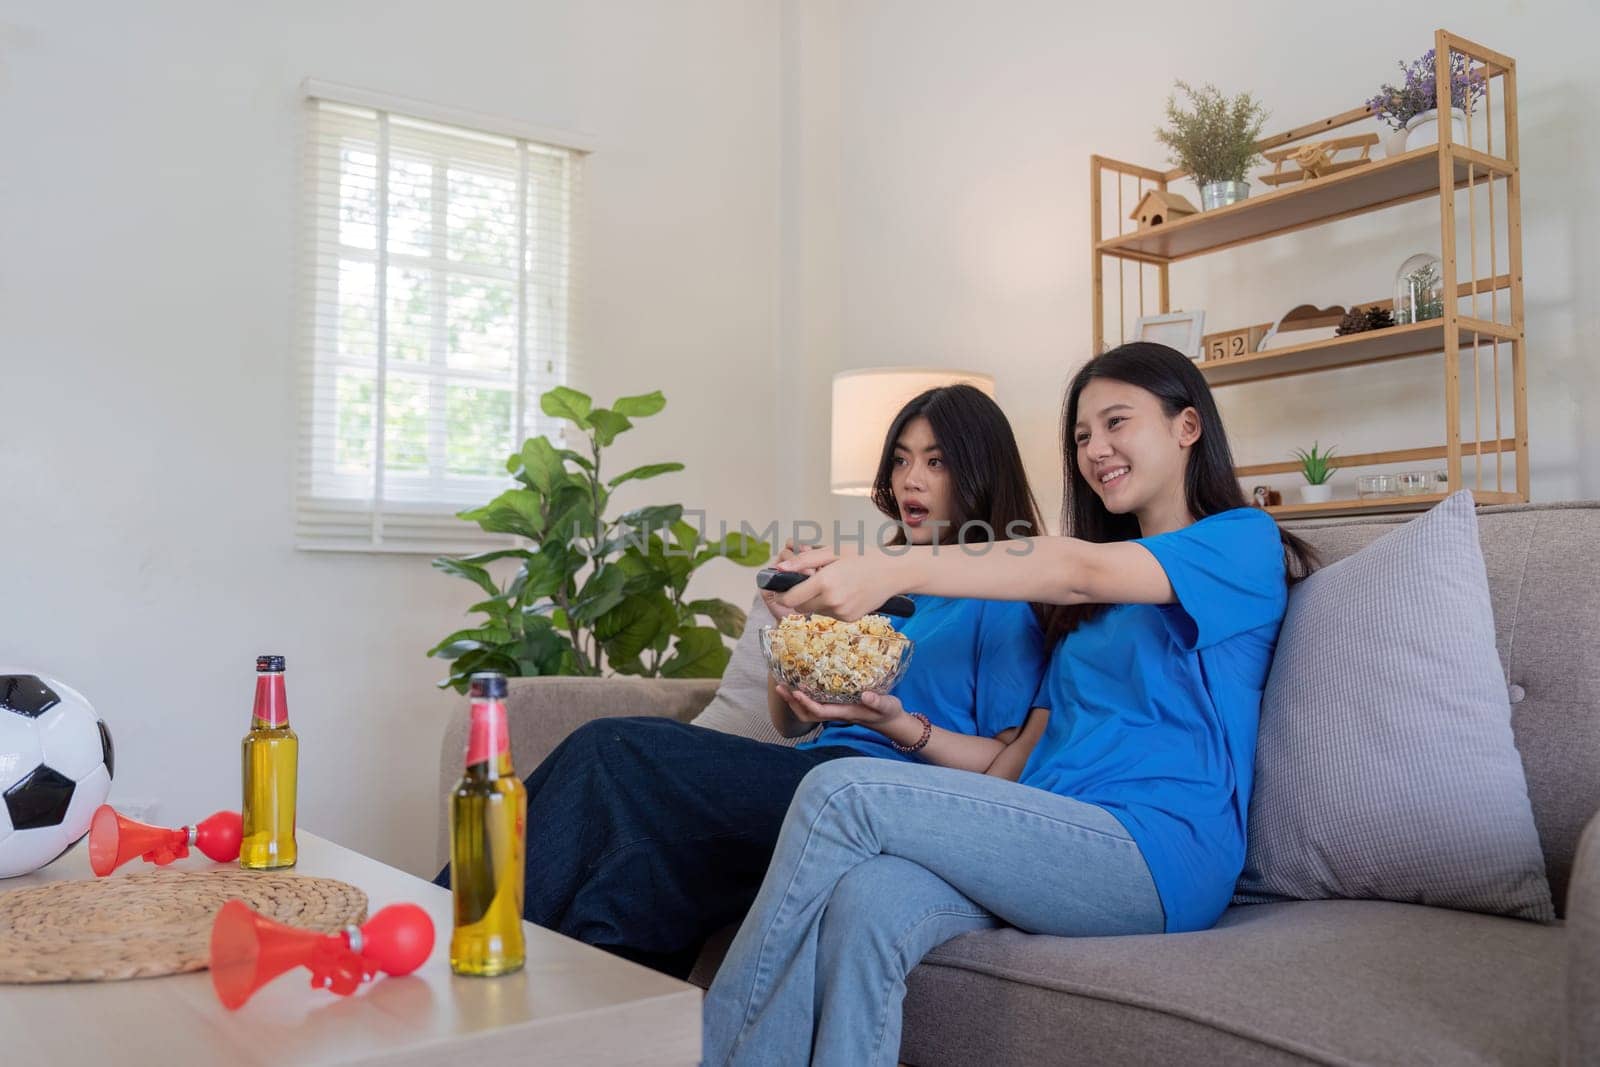 Lesbian couple cheering for Euro football at home with snacks and beer. Concept of LGBTQ pride, sports enthusiasm, and domestic leisure.